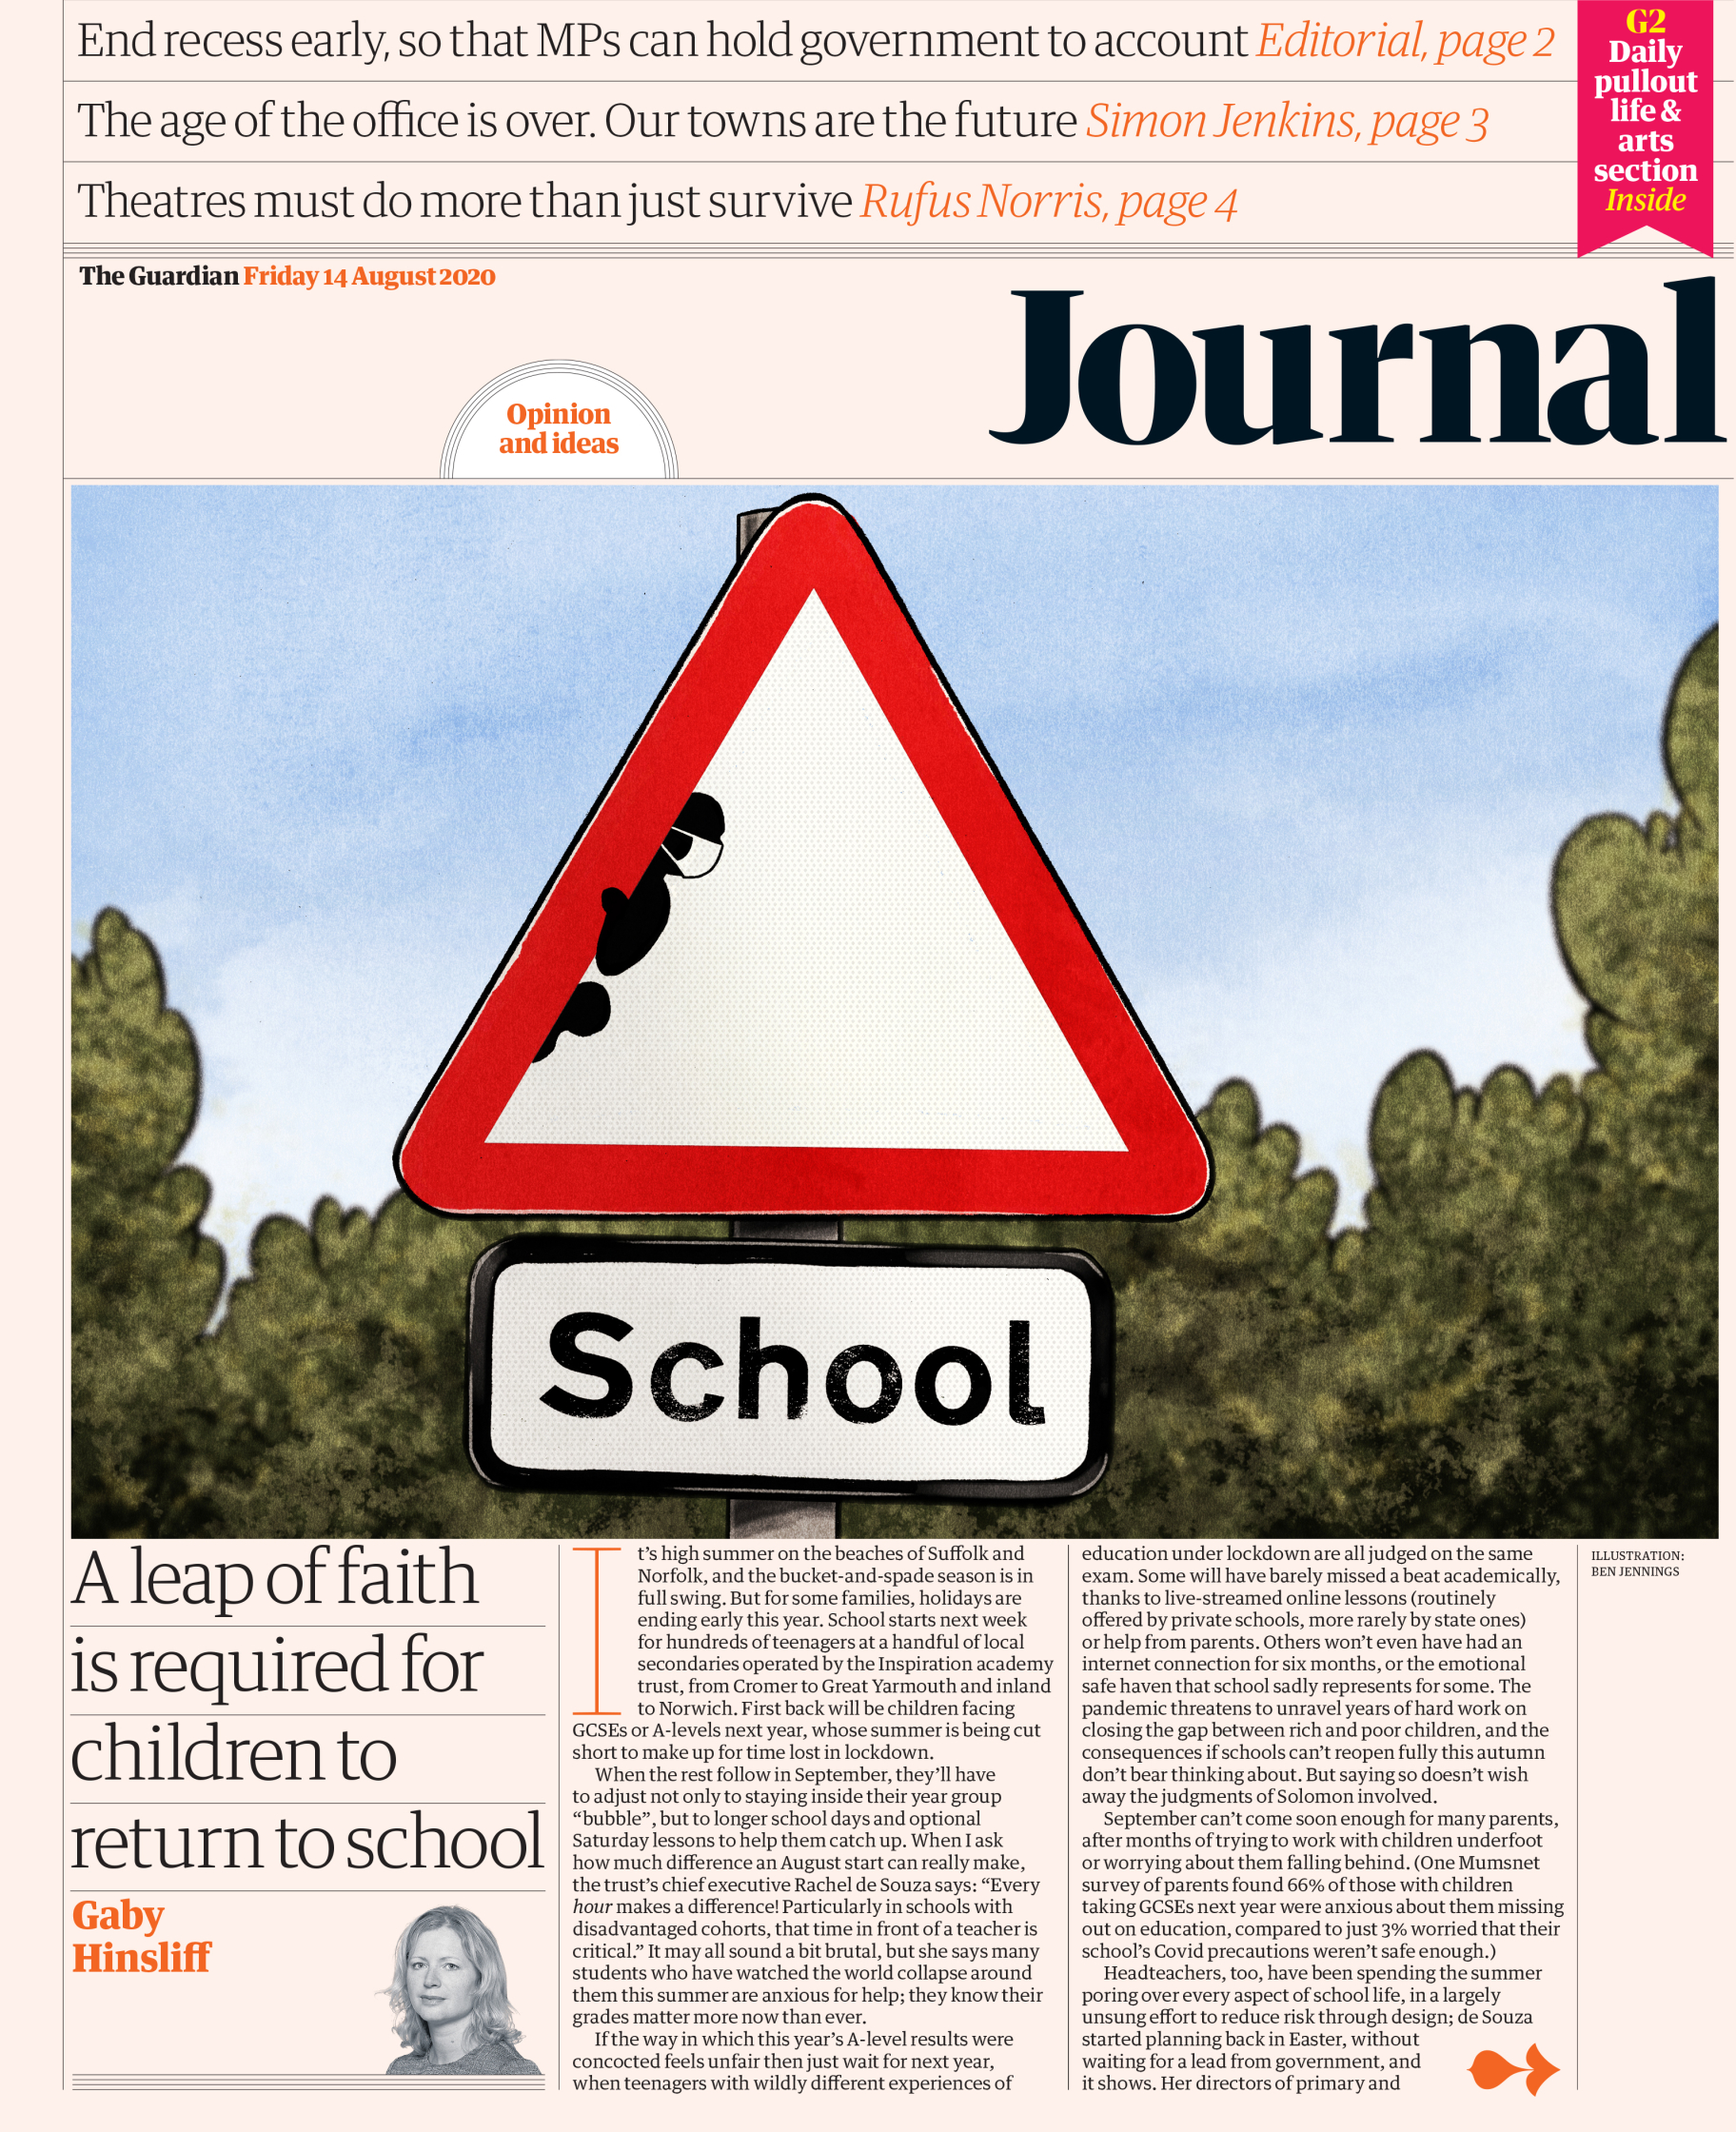 The Guardian � Journal front � 14 August 2020.jpg